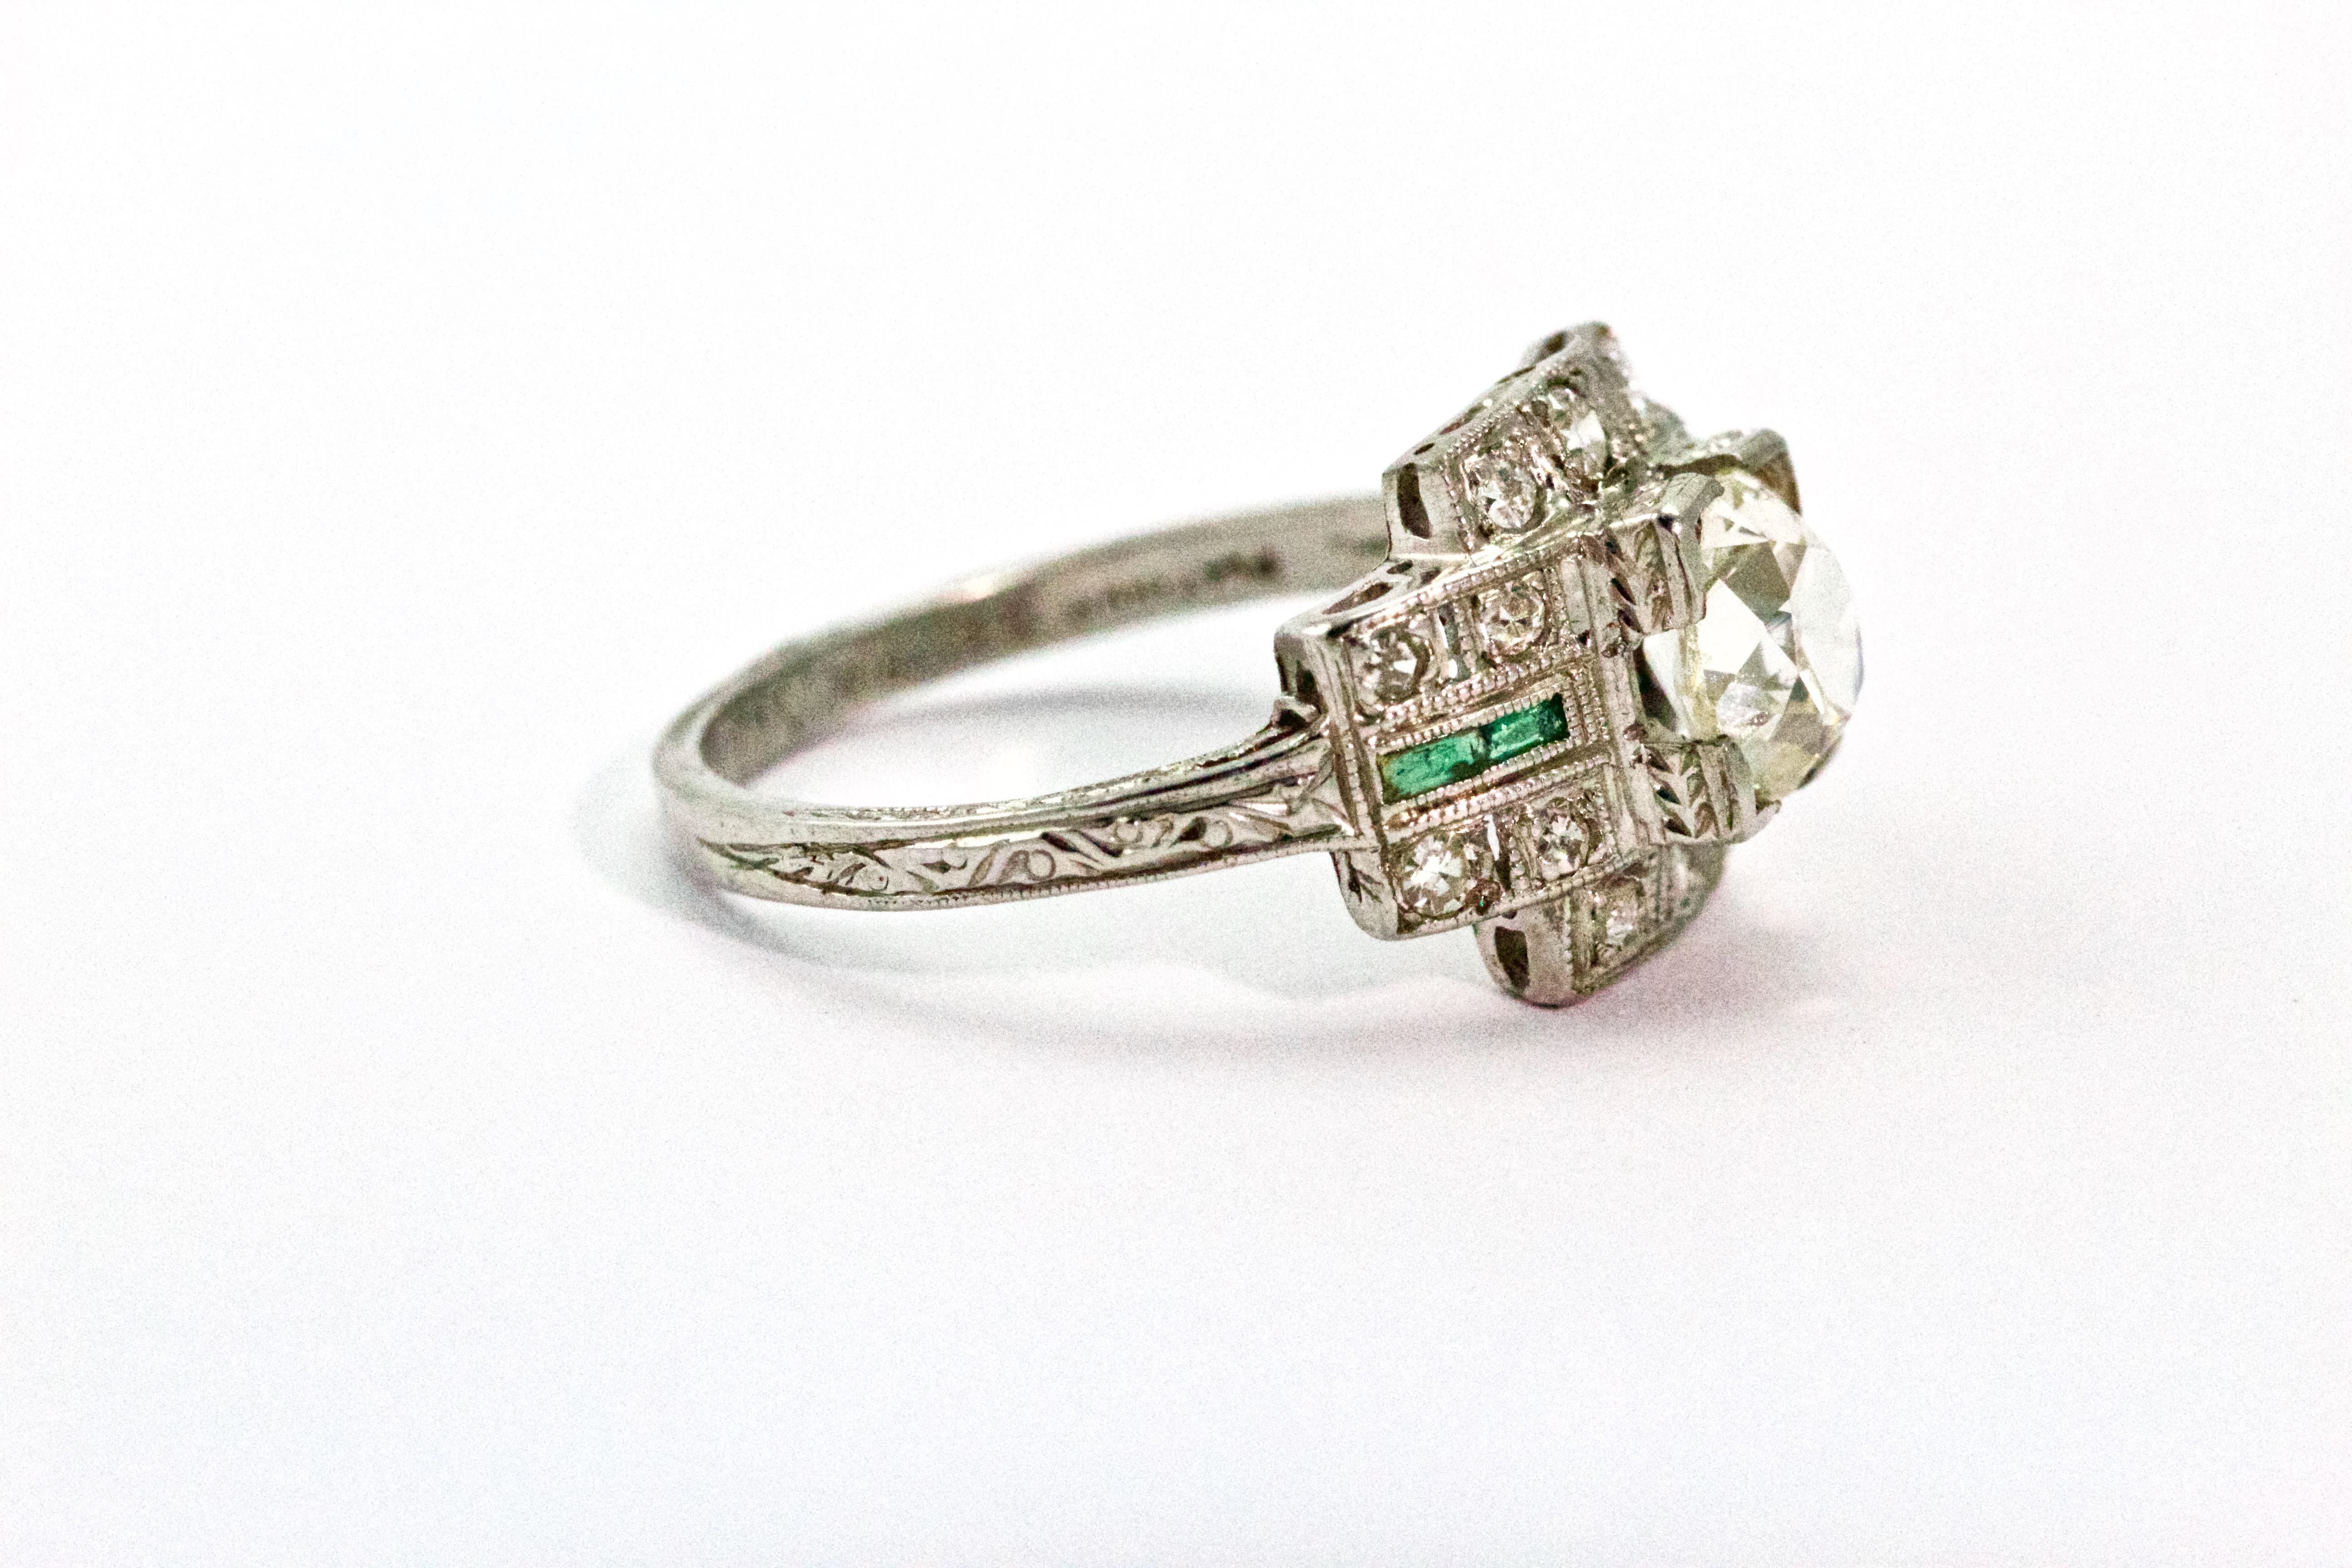 A wonderful 1920s antique cocktail ring with classic Art Deco styling is centred by a chunky-faceted Old European 85 point (approx) diamond of J/K color and SI2 clarity. The delightful 'cross' surround is set with 14 round cut diamonds and 4